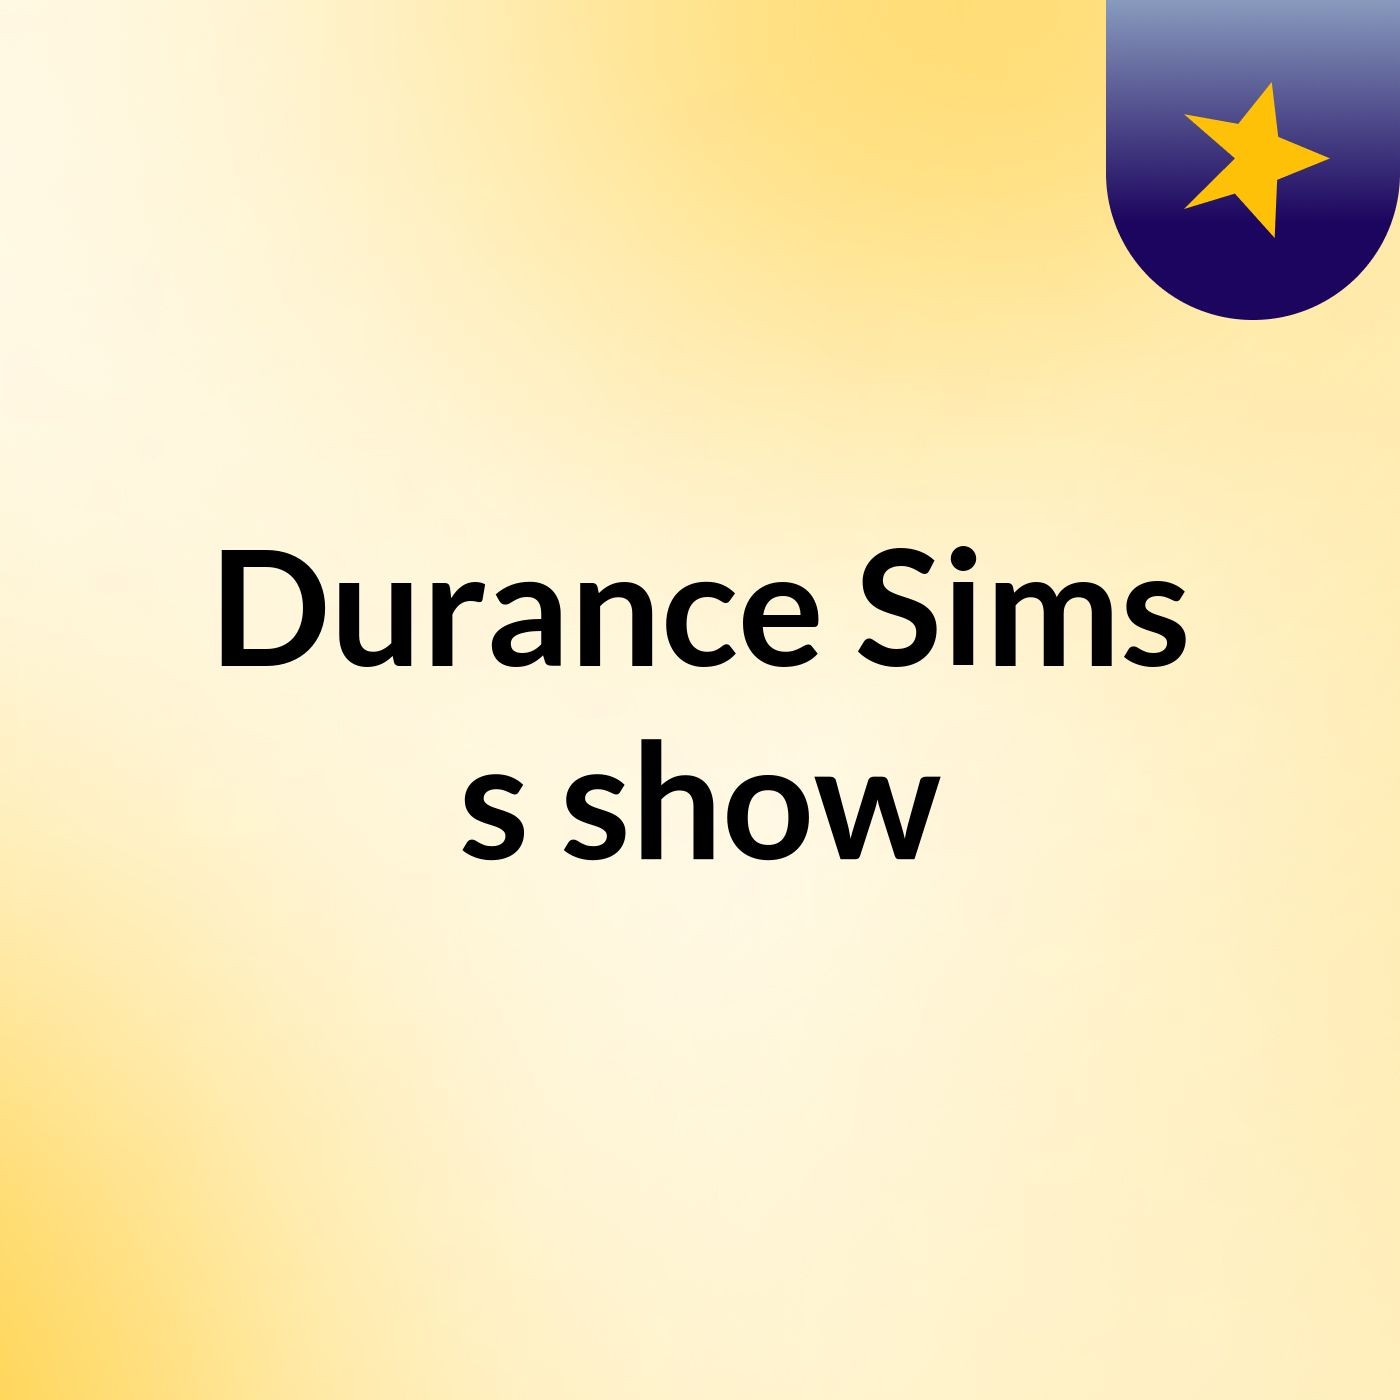 Durance Sims's show